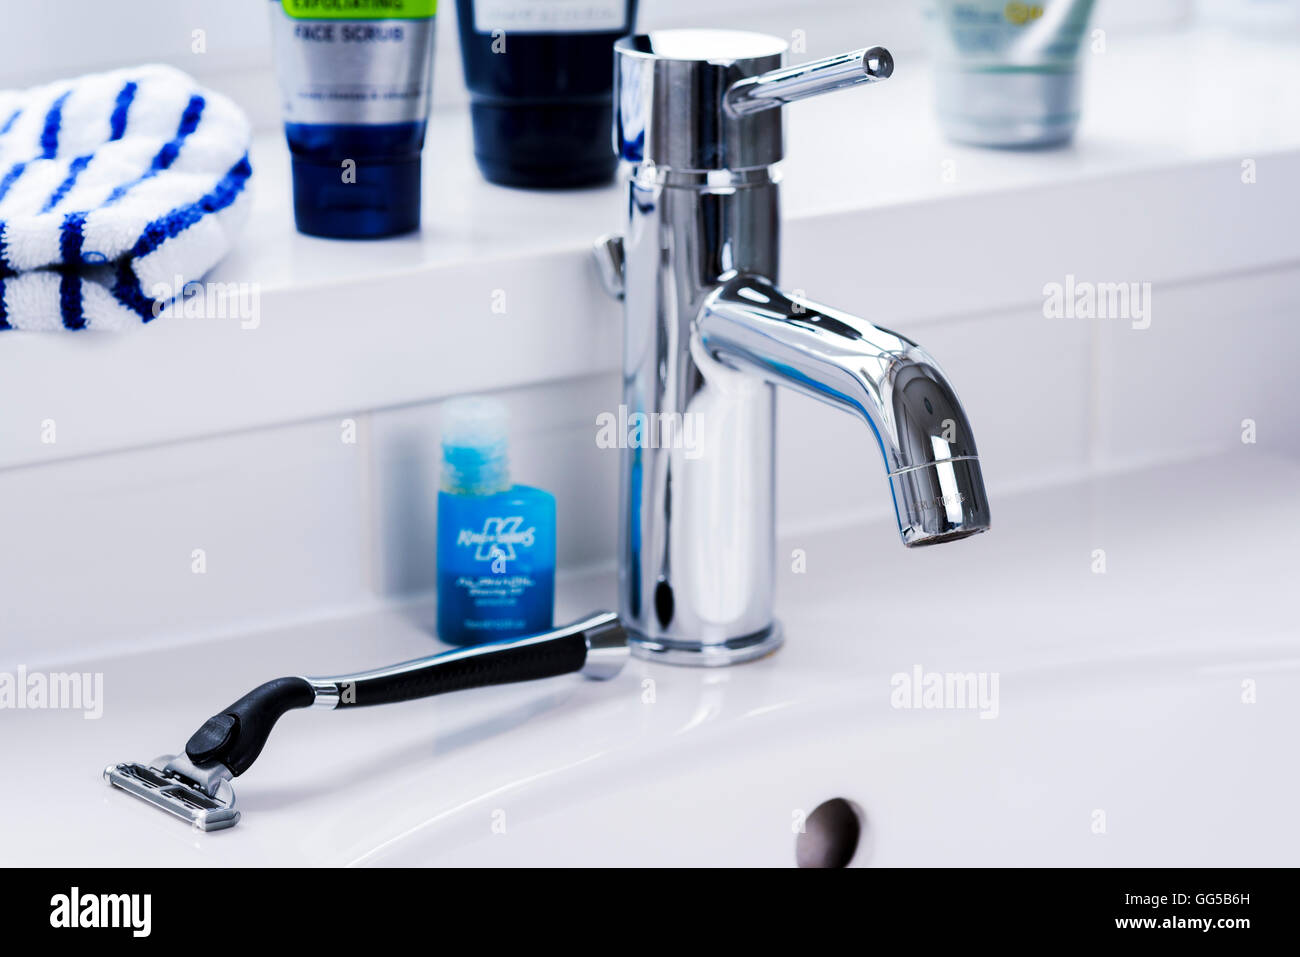 Razor and mens grooming products. Stock Photo